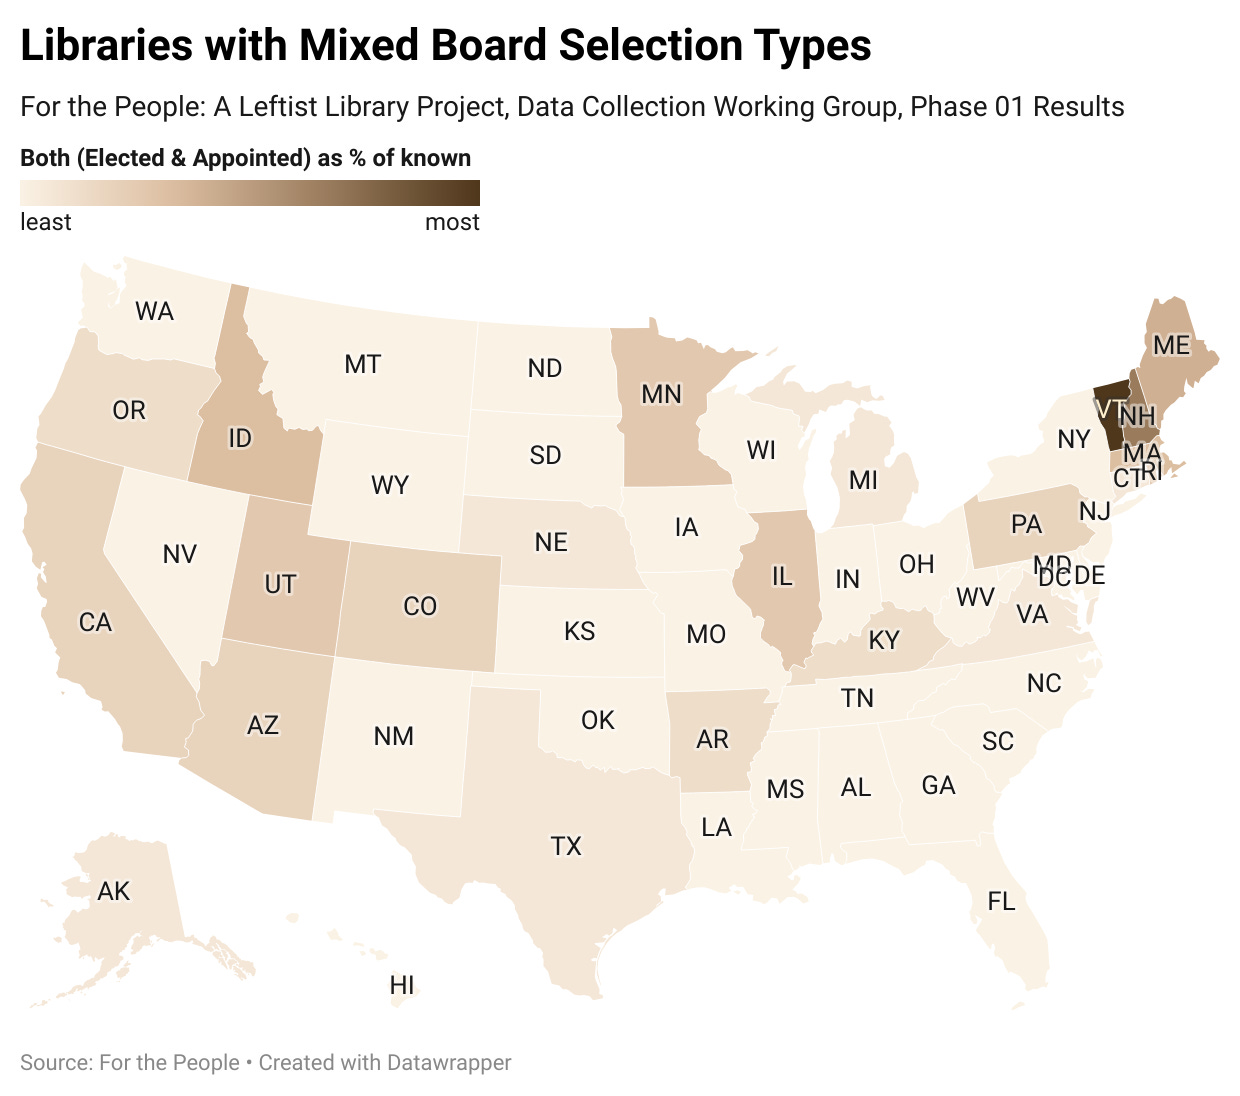 Alt text: A map of the united states with shading shading that indicates the percent of libraries where the board selection type is mixed (both appointed and elected). The darker the shade the higher the percent mixed. The 5 states with highest percent mixed are Vermont, New Hampshire, Maine, Idaho, and Massachusetts.  The full data source is available in Google sheets here: https://docs.google.com/spreadsheets/d/1NFDgS7eFQ-FQxdMAEaccrIO8Vb8YlgLPg7Xv3xfA_NI/